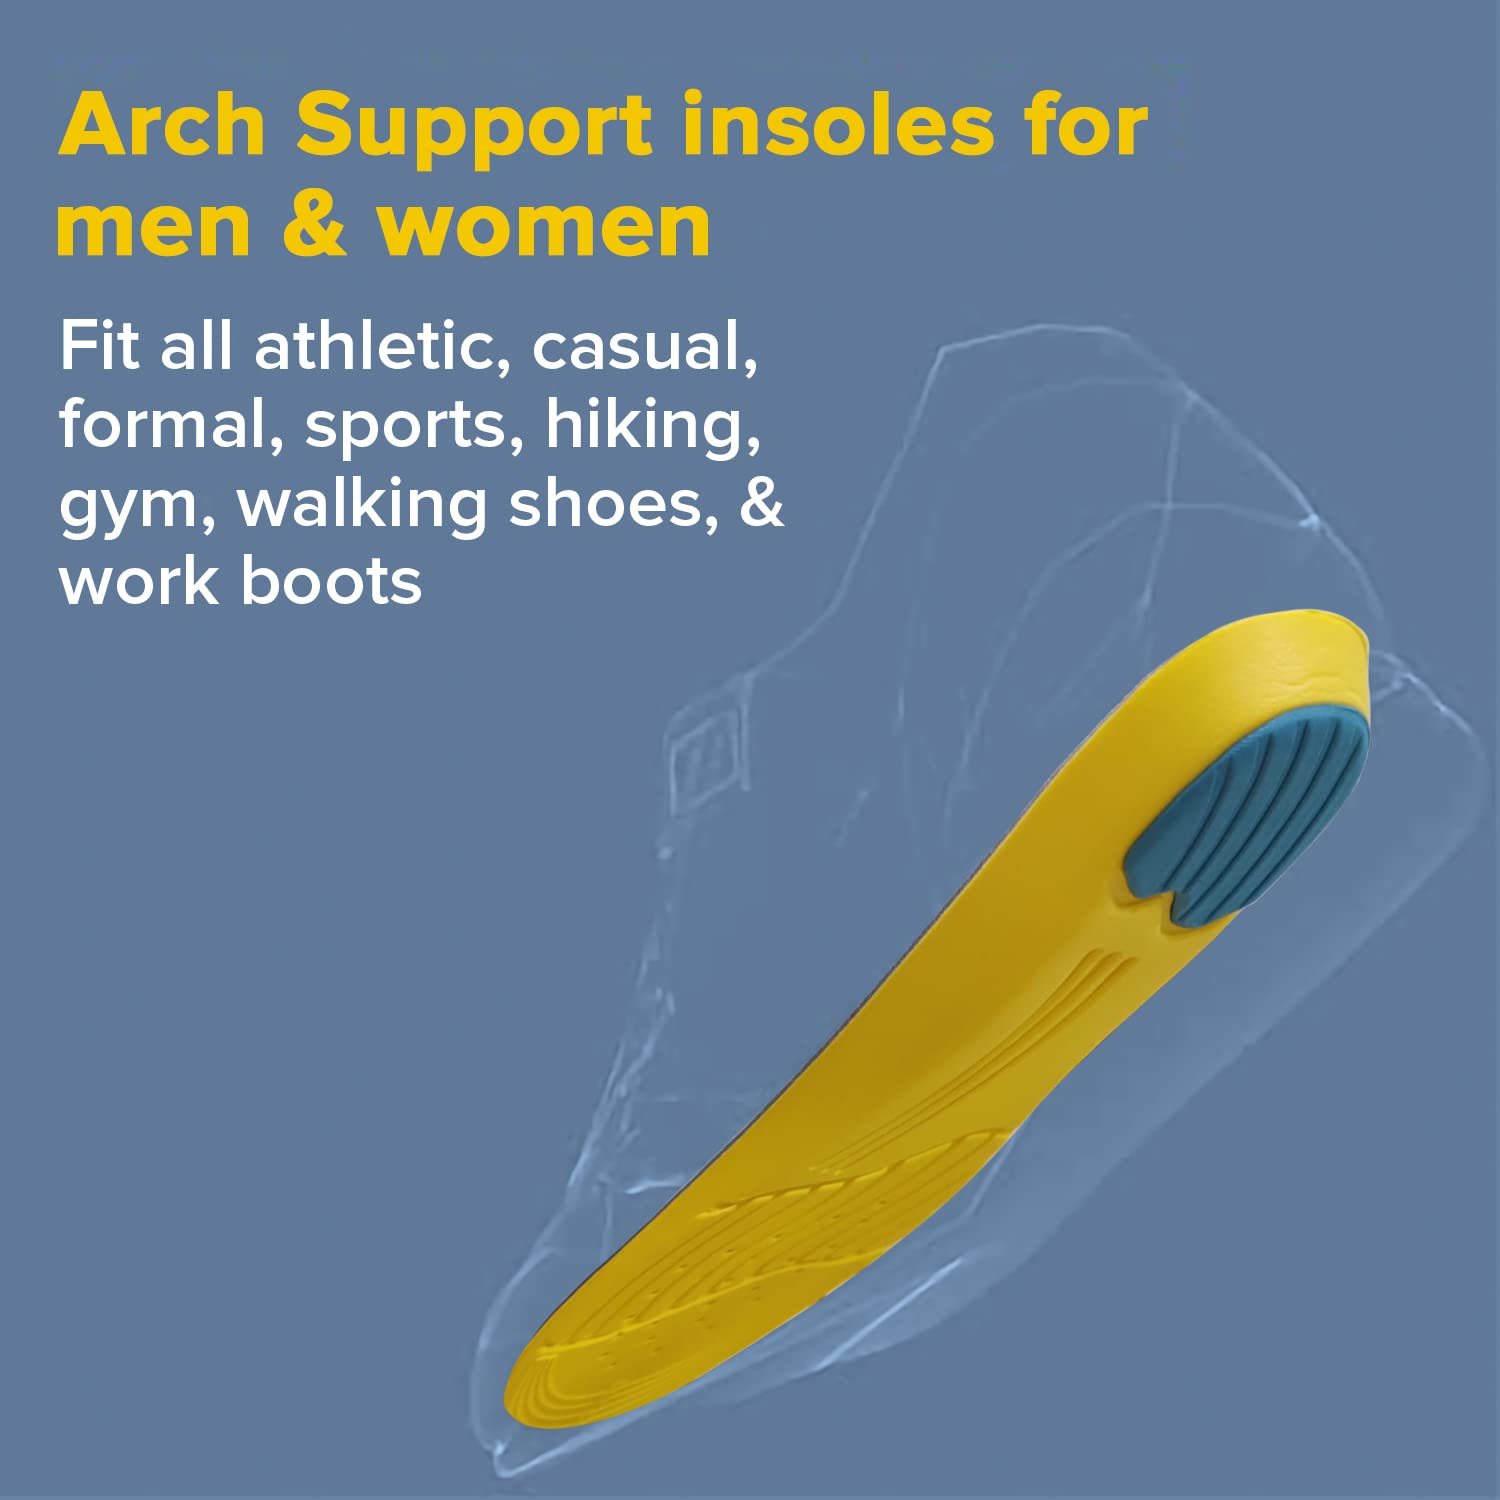 Dr Foot Gel Insoles Pair | For Walking, Running Shoes | All Day Comfort Shoe Inserts With Dual Gel Technology | Ideal Full-Length Sole For Every Shoe | For Both Men & Women- 1 Pair (Free) (Pack of 10)